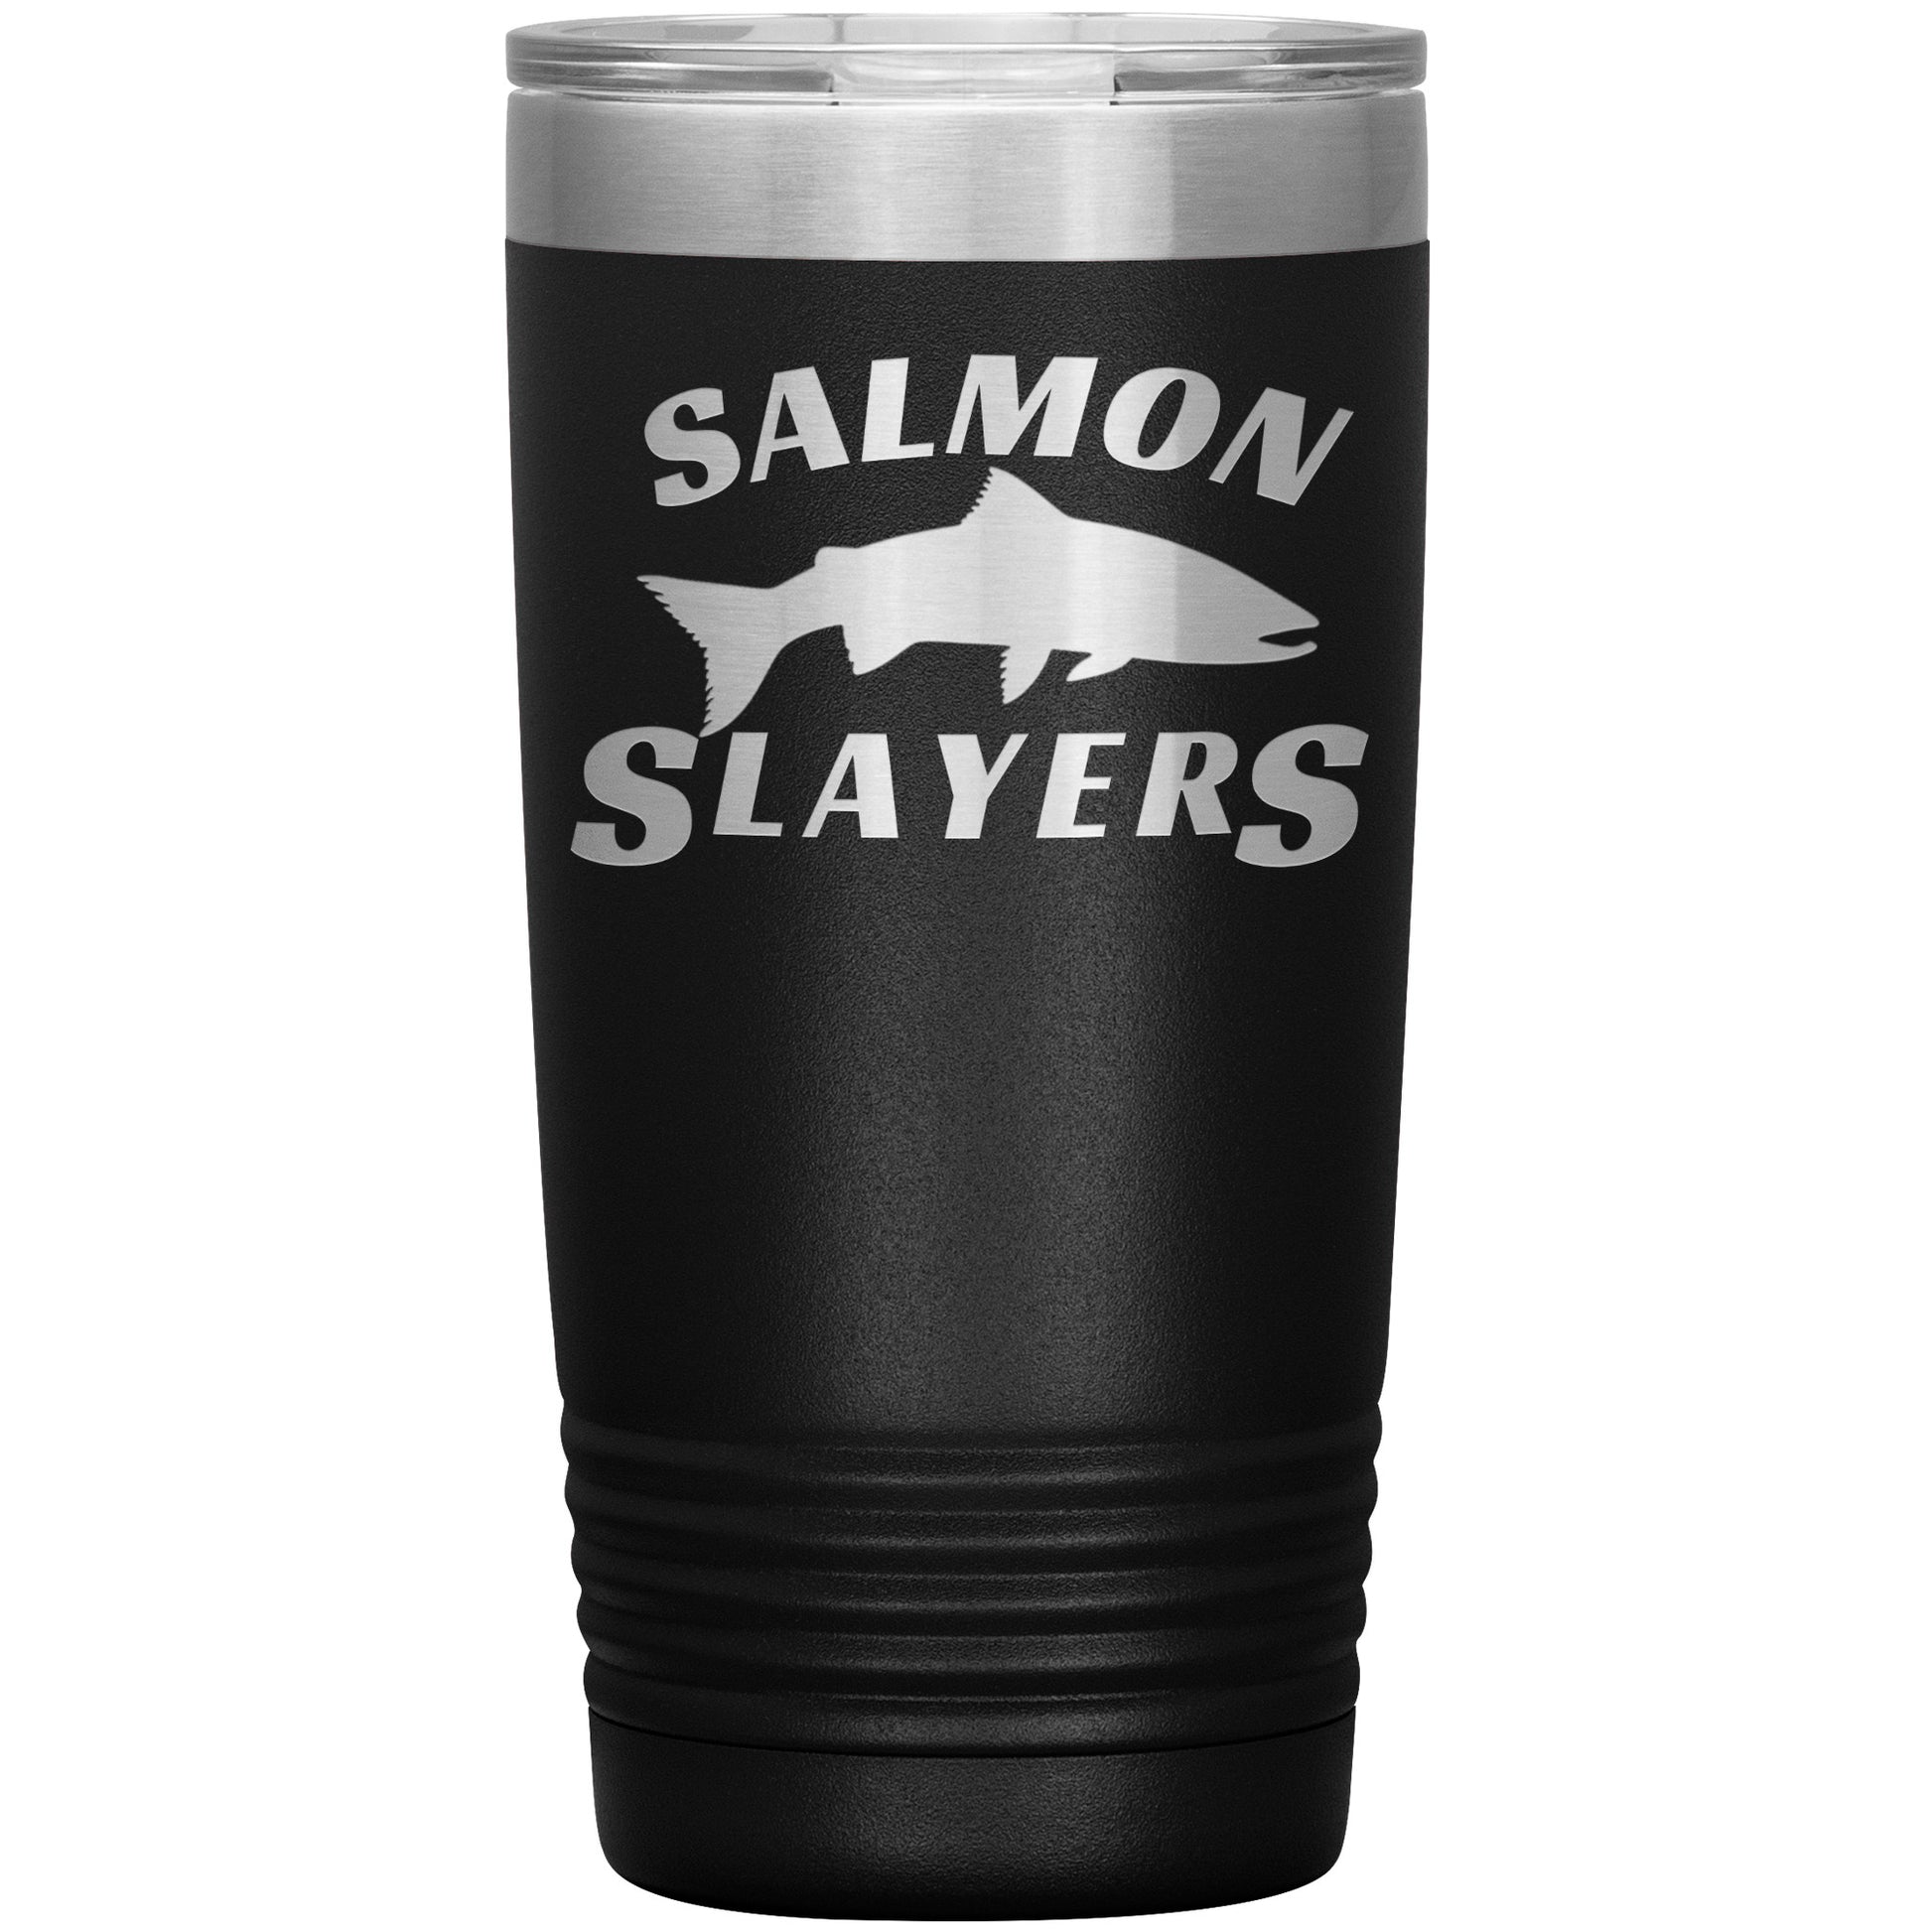 Green 20oz insulated Salmon Slayers tumbler with a silver rim and base, featuring a white silhouette of a fish and the text "salmon slayers" in bold, white letters.